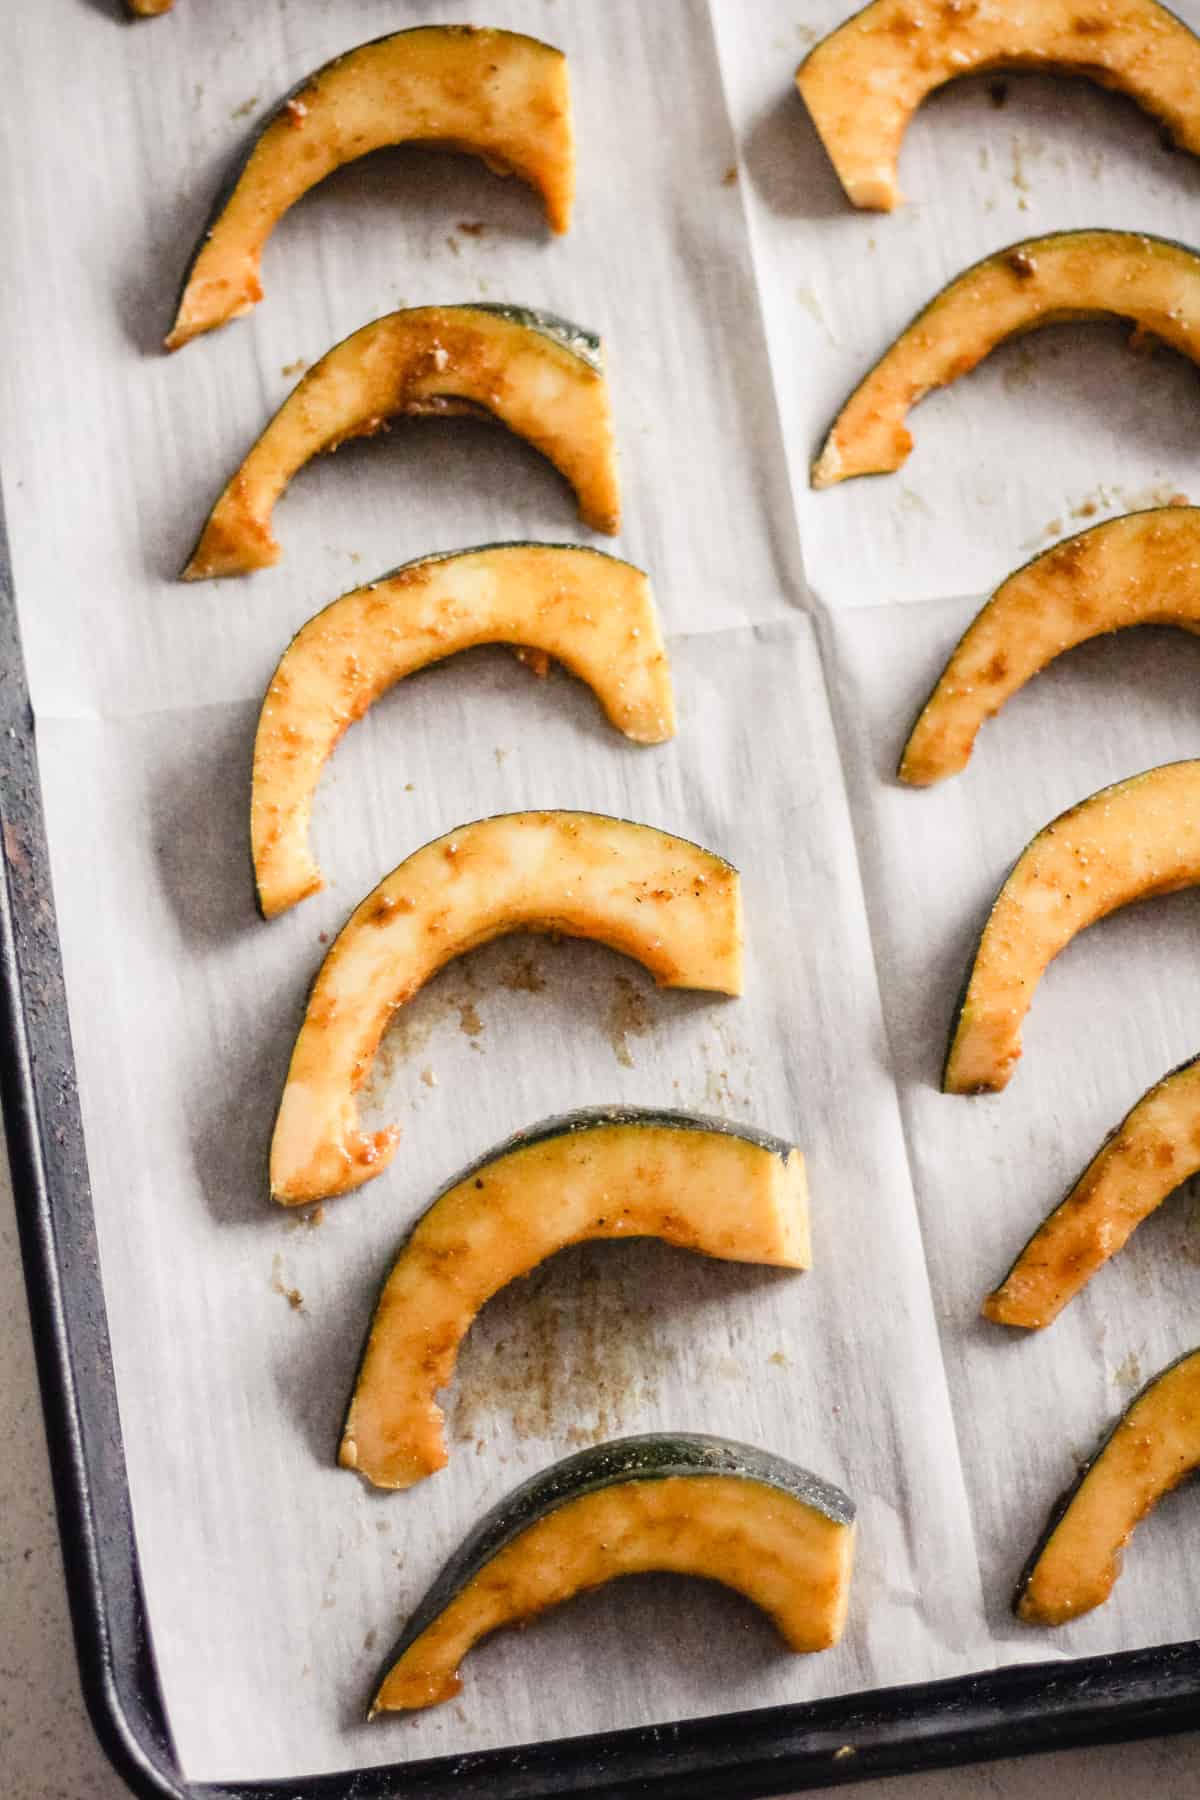 Uncooked squash wedges on a baking sheet.